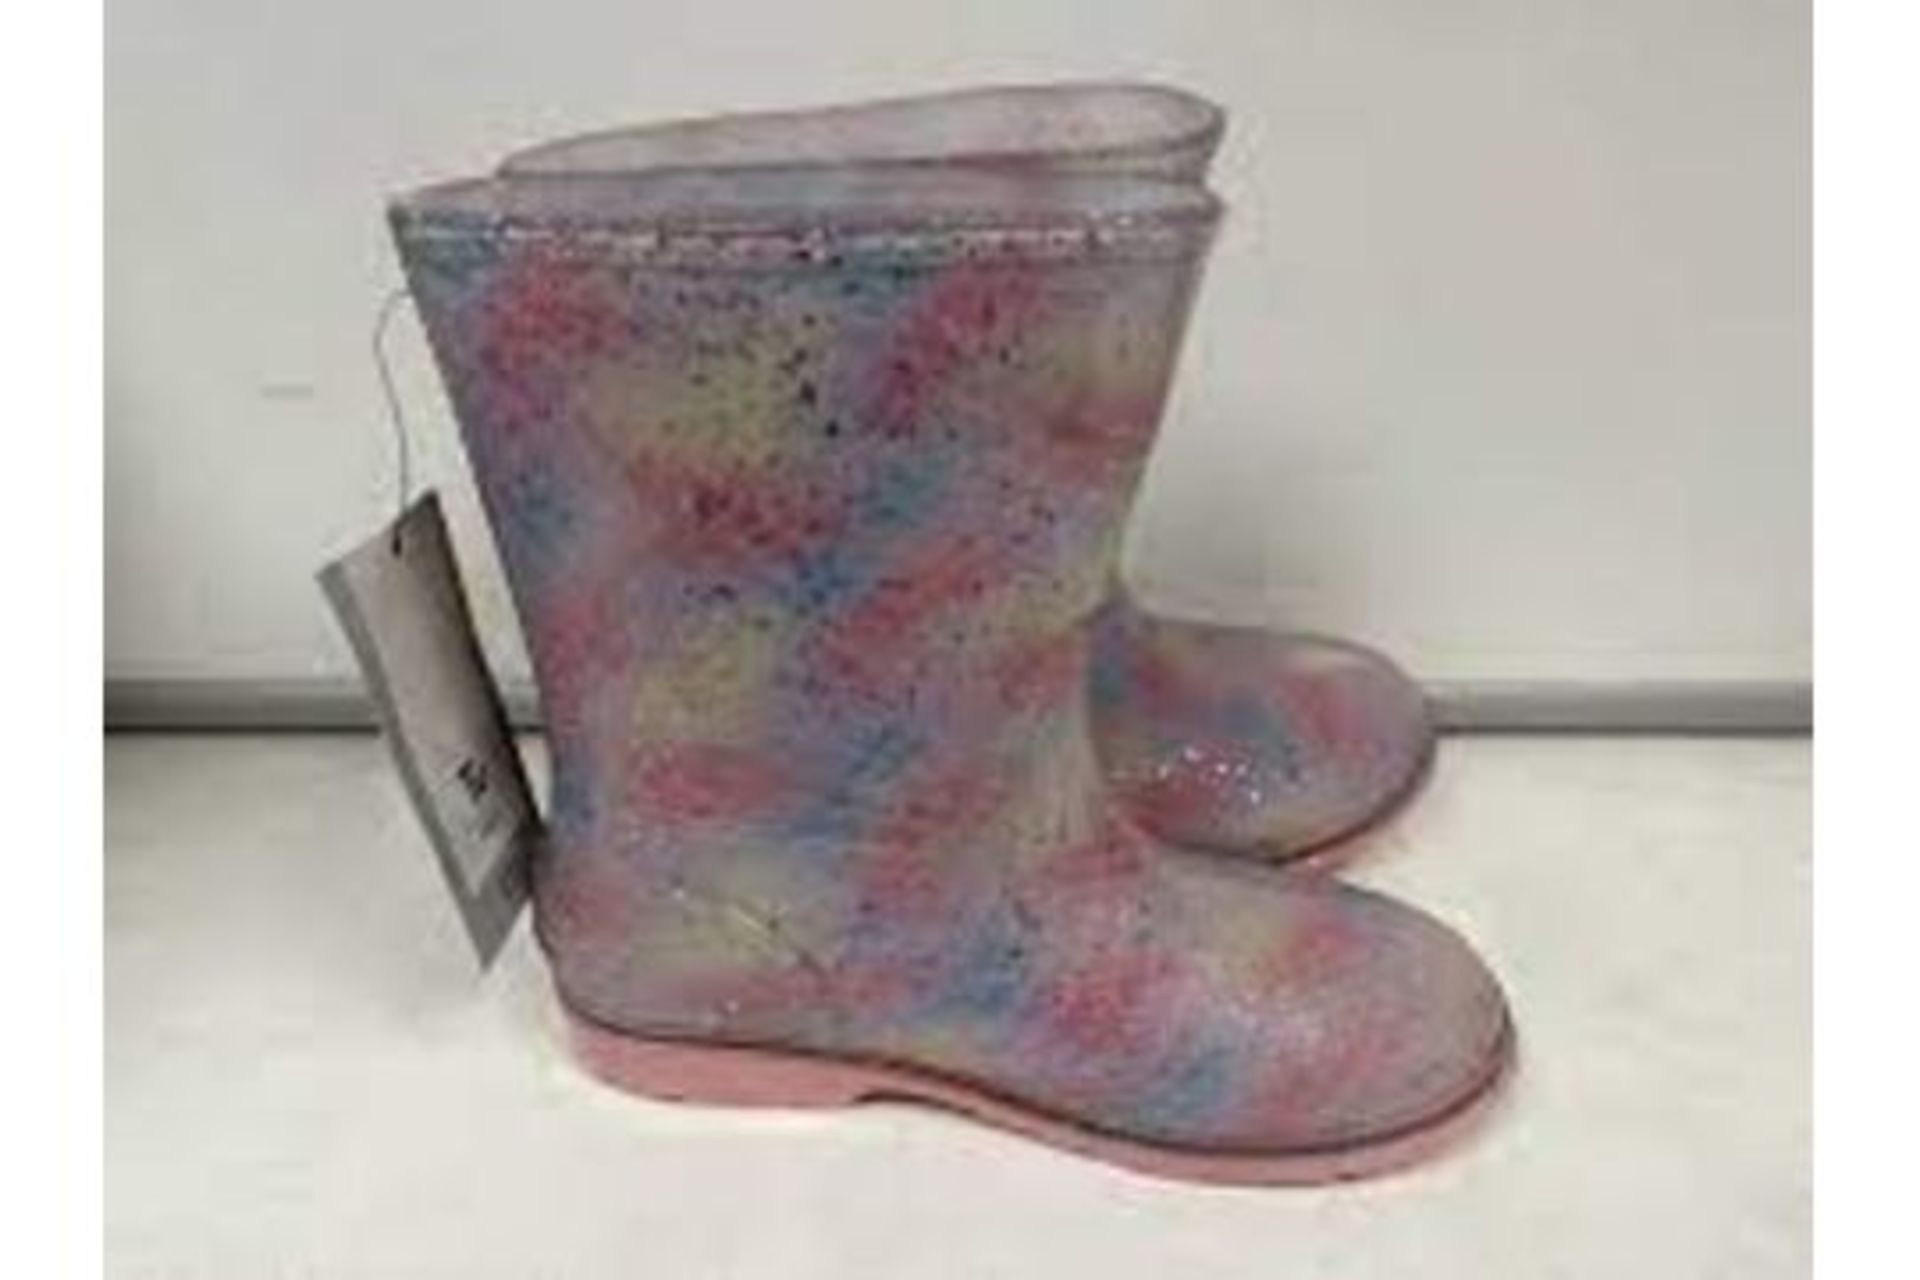 20 X NEW PACKAGED PAIRS OF TU KIDS CHILDRENS GLITTERY WELLIES IN A RATIO PACKED BOX WITH VARIOUS